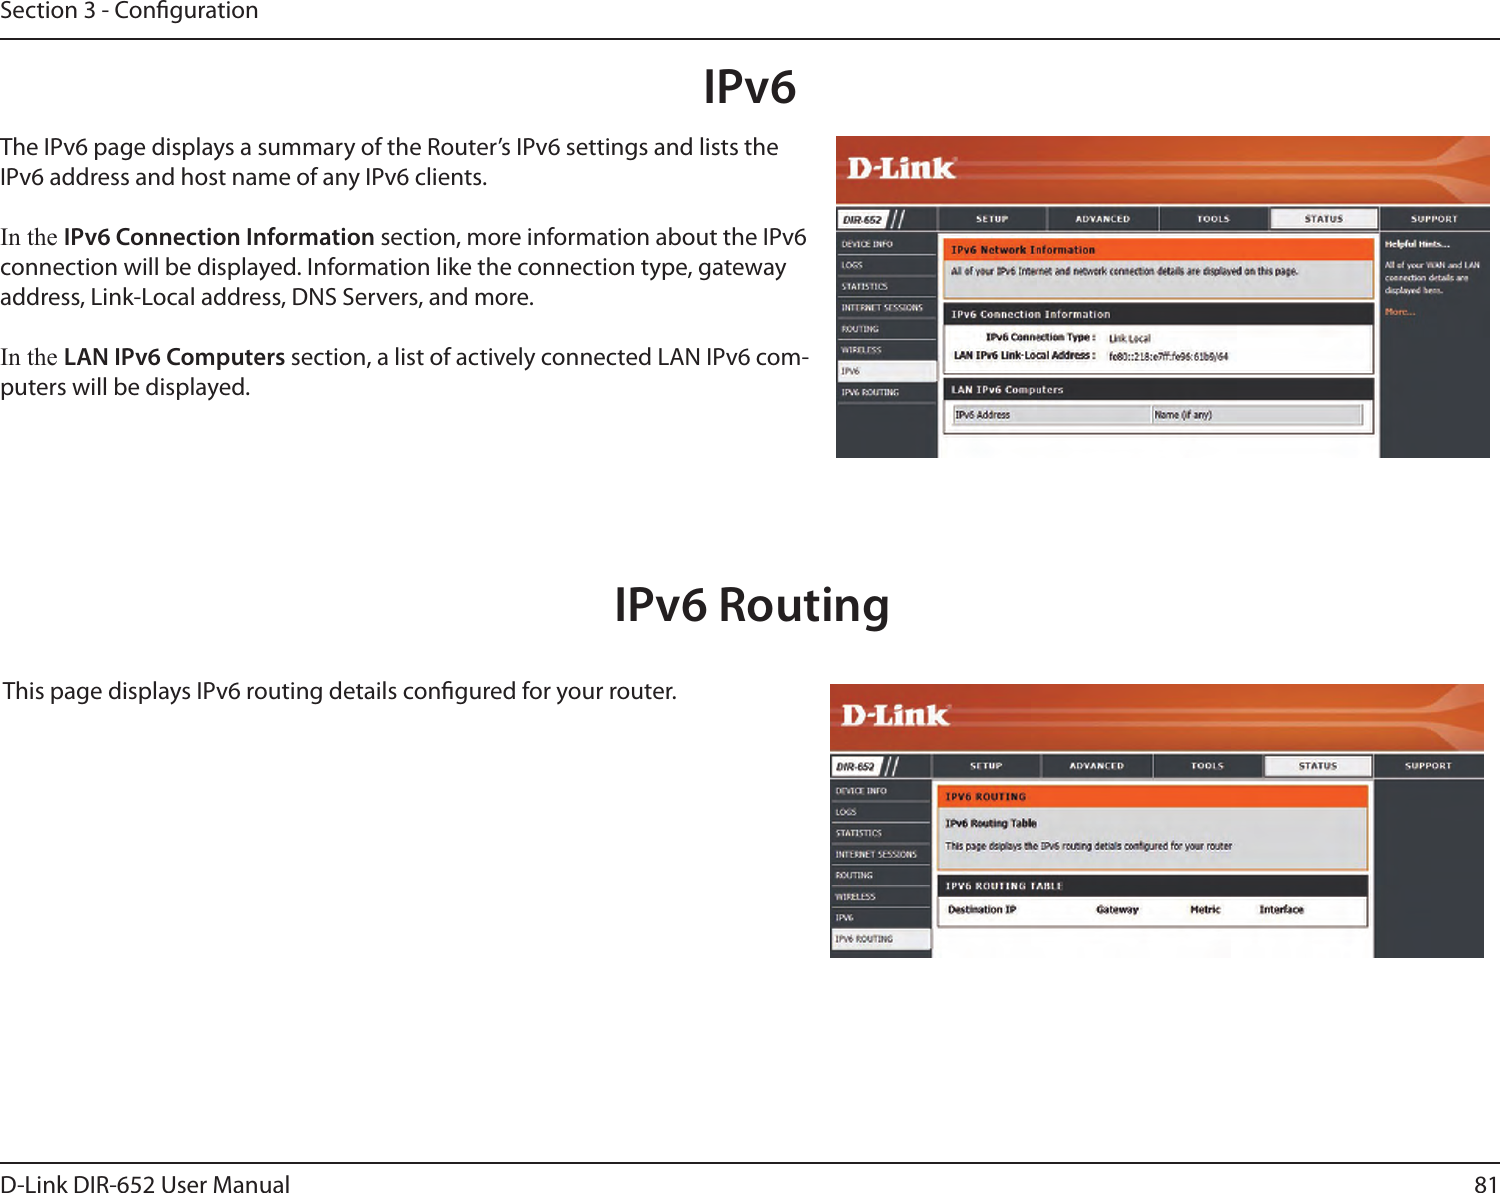 81D-Link DIR-652 User ManualSection 3 - CongurationIPv6The IPv6 page displays a summary of the Router’s IPv6 settings and lists the IPv6 address and host name of any IPv6 clients.In the IPv6 Connection Information section, more information about the IPv6 connection will be displayed. Information like the connection type, gateway address, Link-Local address, DNS Servers, and more.In the LAN IPv6 Computers section, a list of actively connected LAN IPv6 com-puters will be displayed.IPv6 RoutingThis page displays IPv6 routing details congured for your router. 